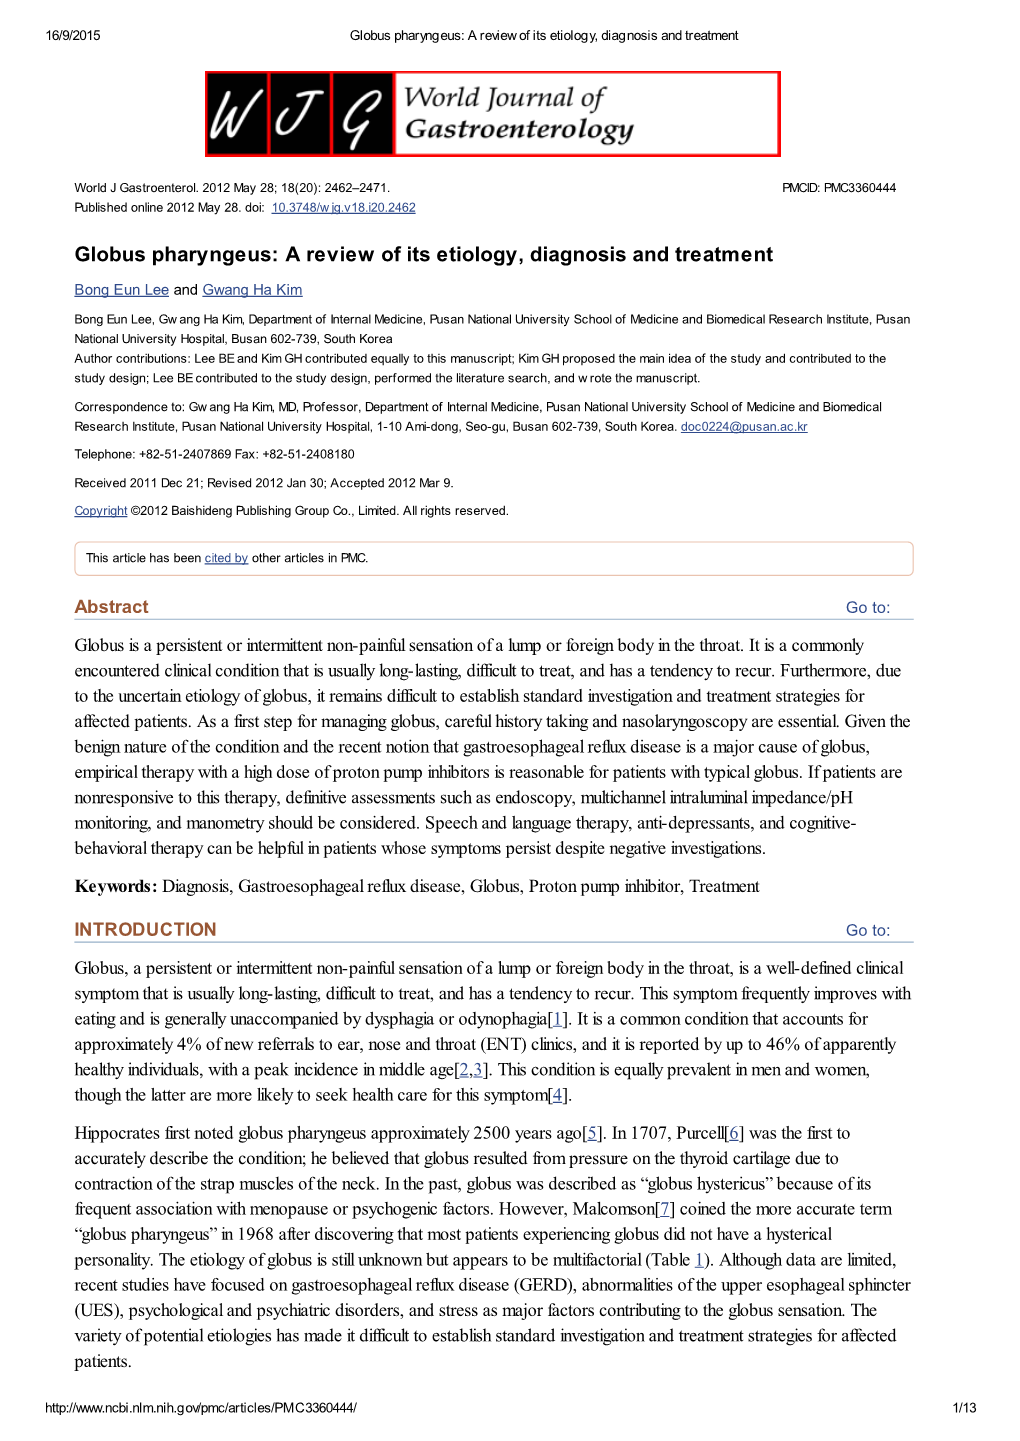 Globus Pharyngeus: a Review of Its Etiology, Diagnosis and Treatment